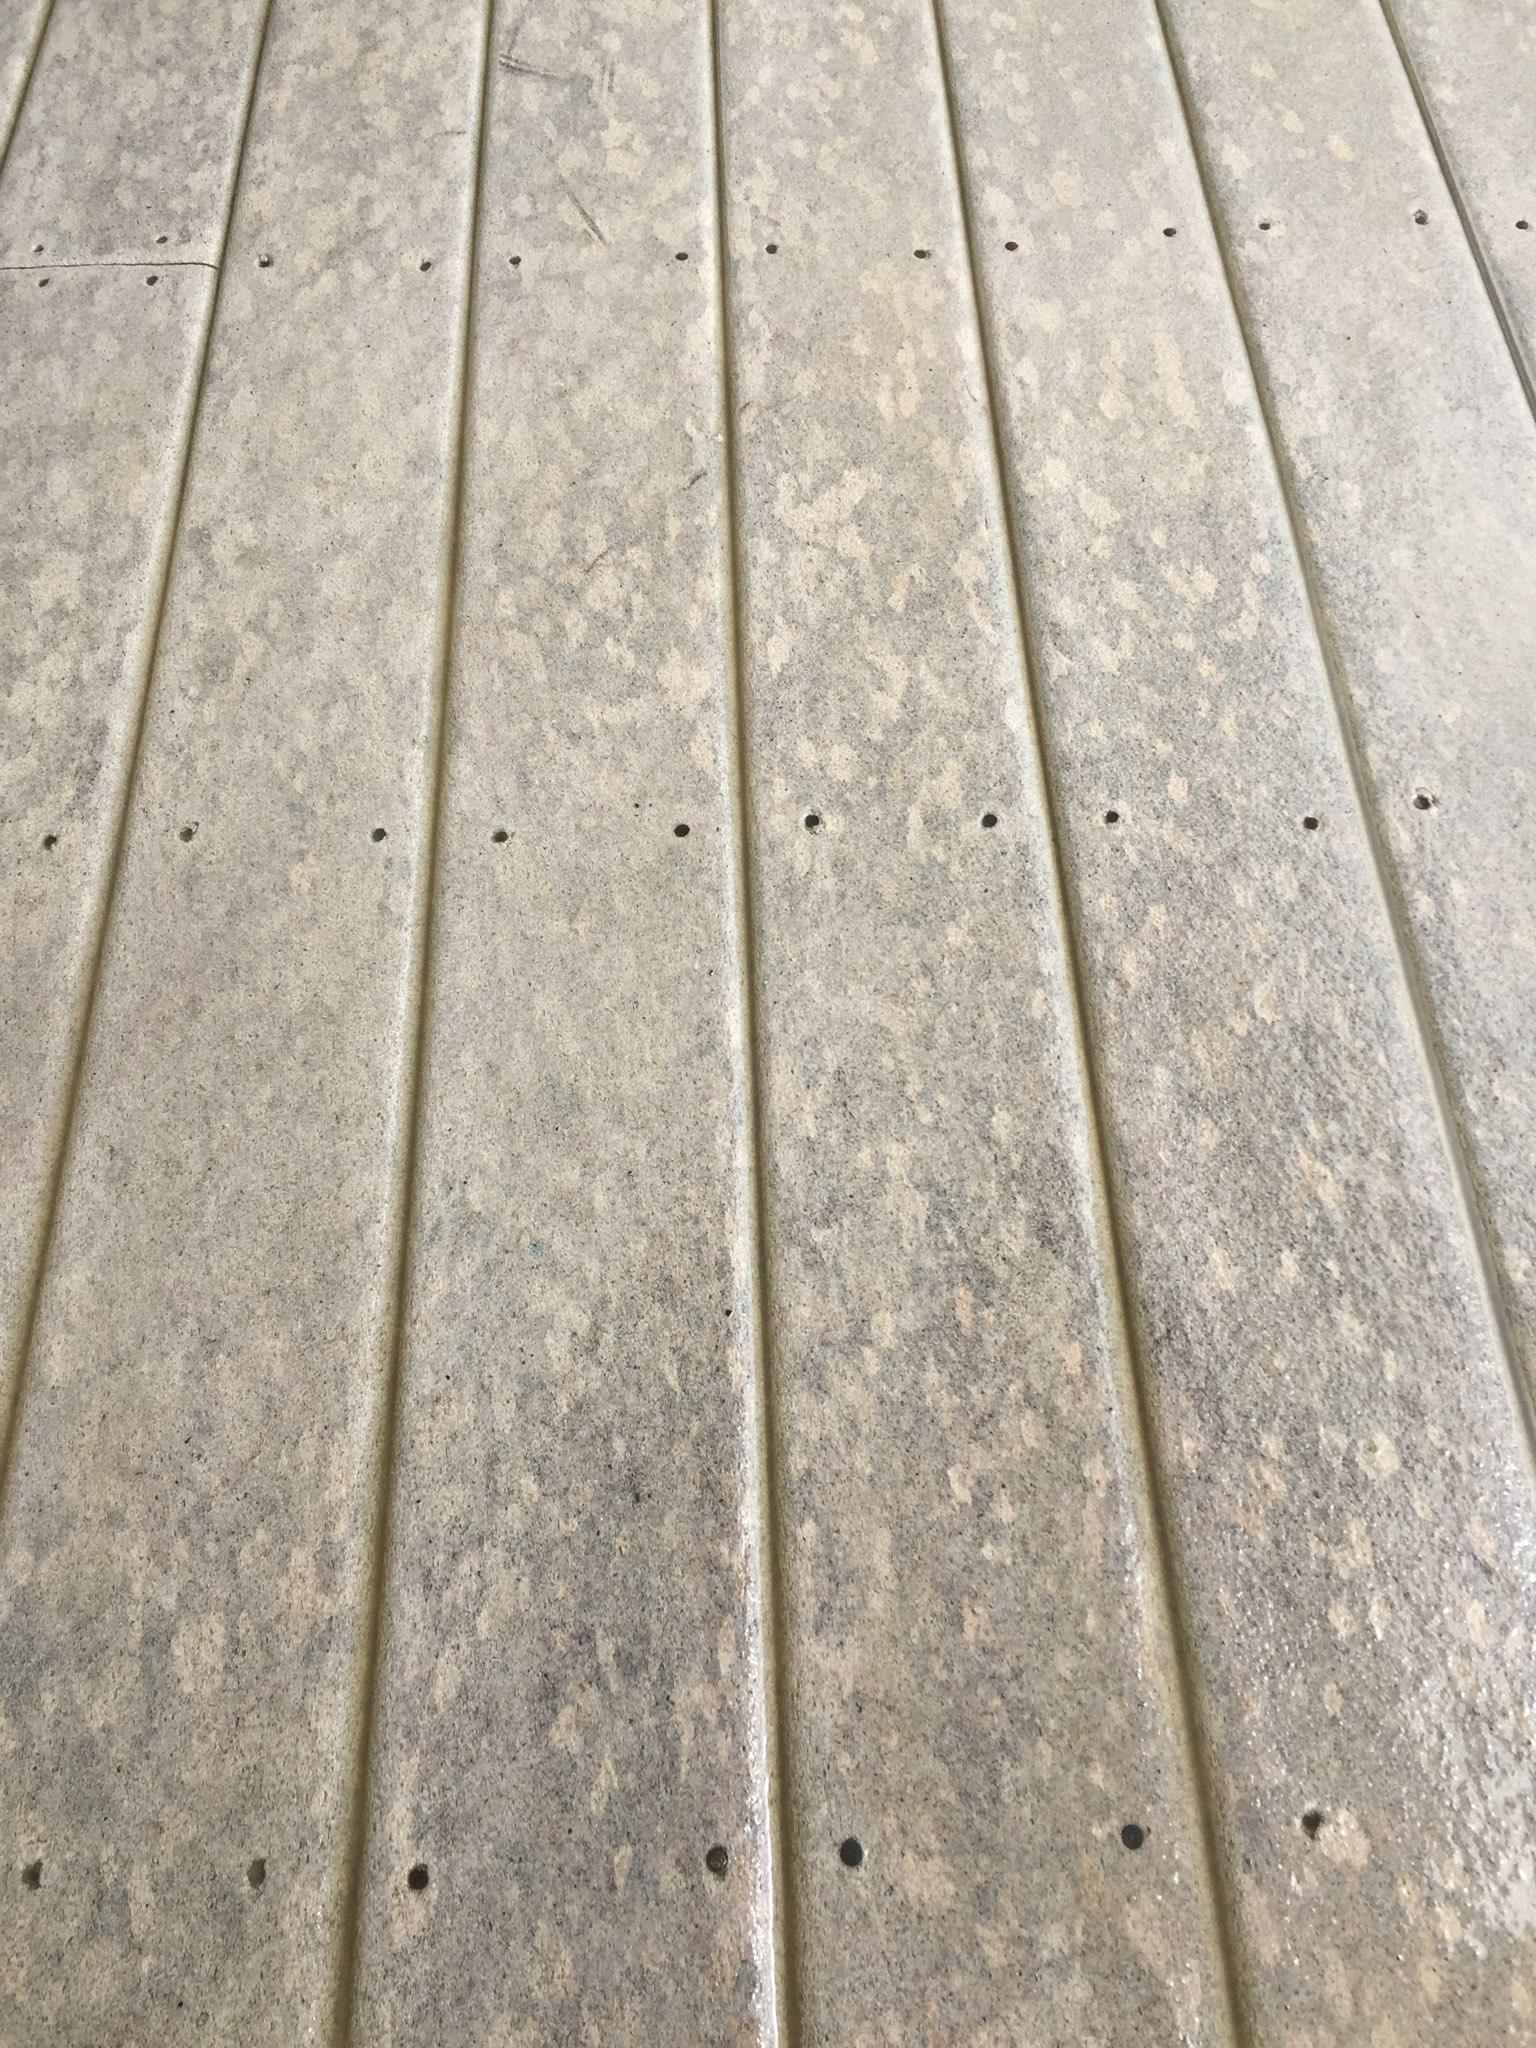 Composite Deck Looks Stained After Washing Stainssurfaces inside measurements 1536 X 2048